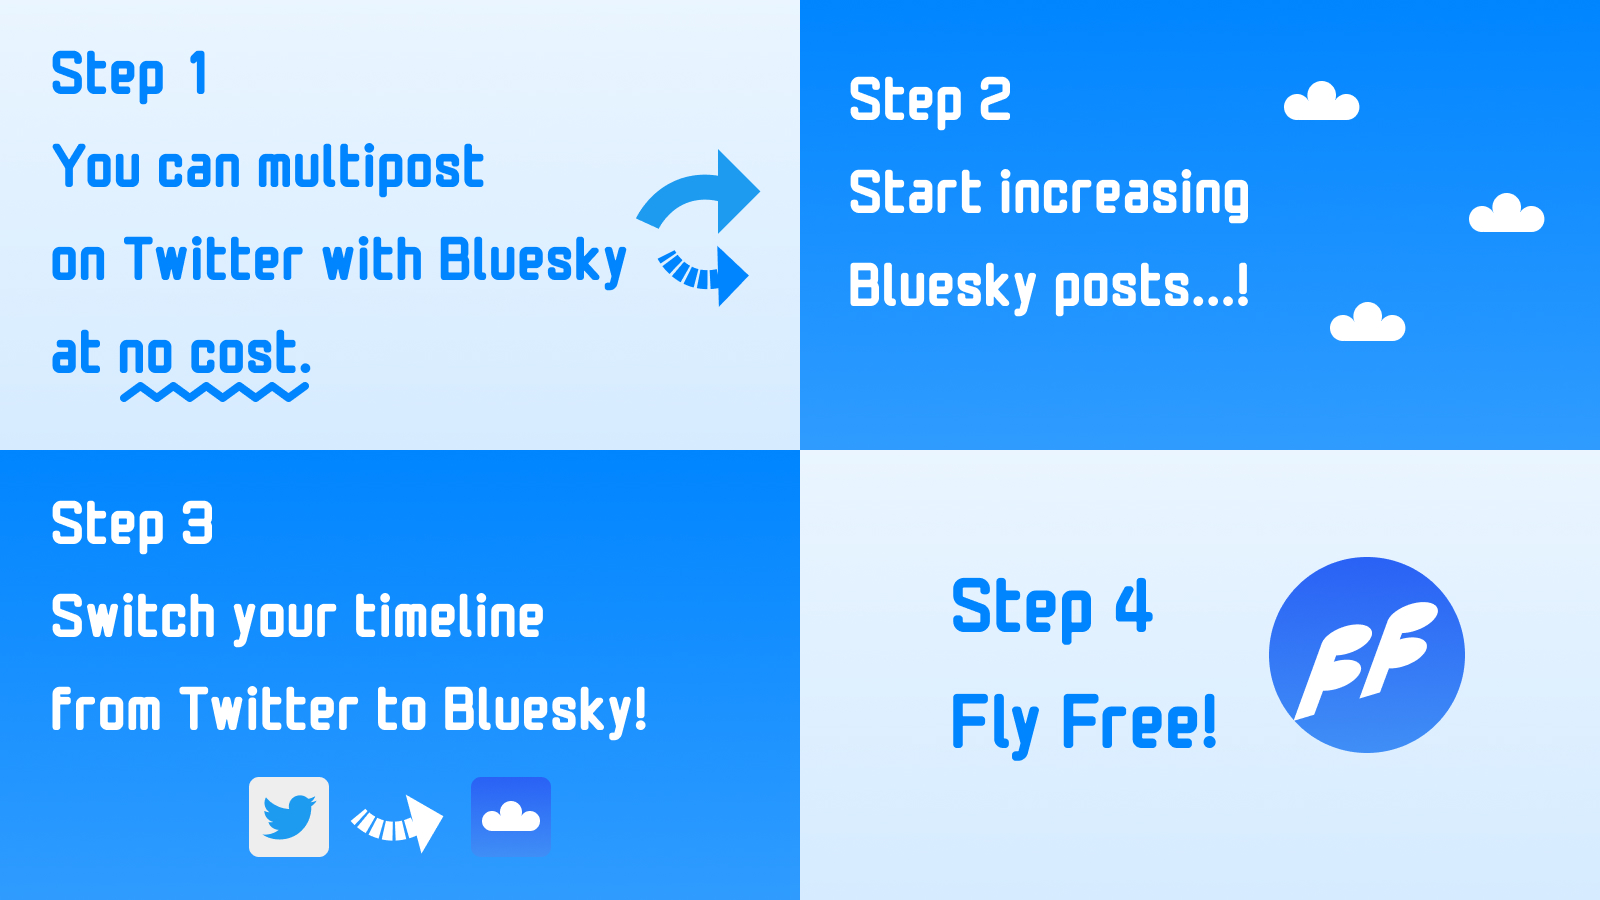 Step 1 You can multipost on Twitter with Bluesky at no cost. / Step 2 Start increasing Bluesky posts…! / Step 3 Switch your timeline from Twitter to Bluesky! / Step 4 Fly Free!